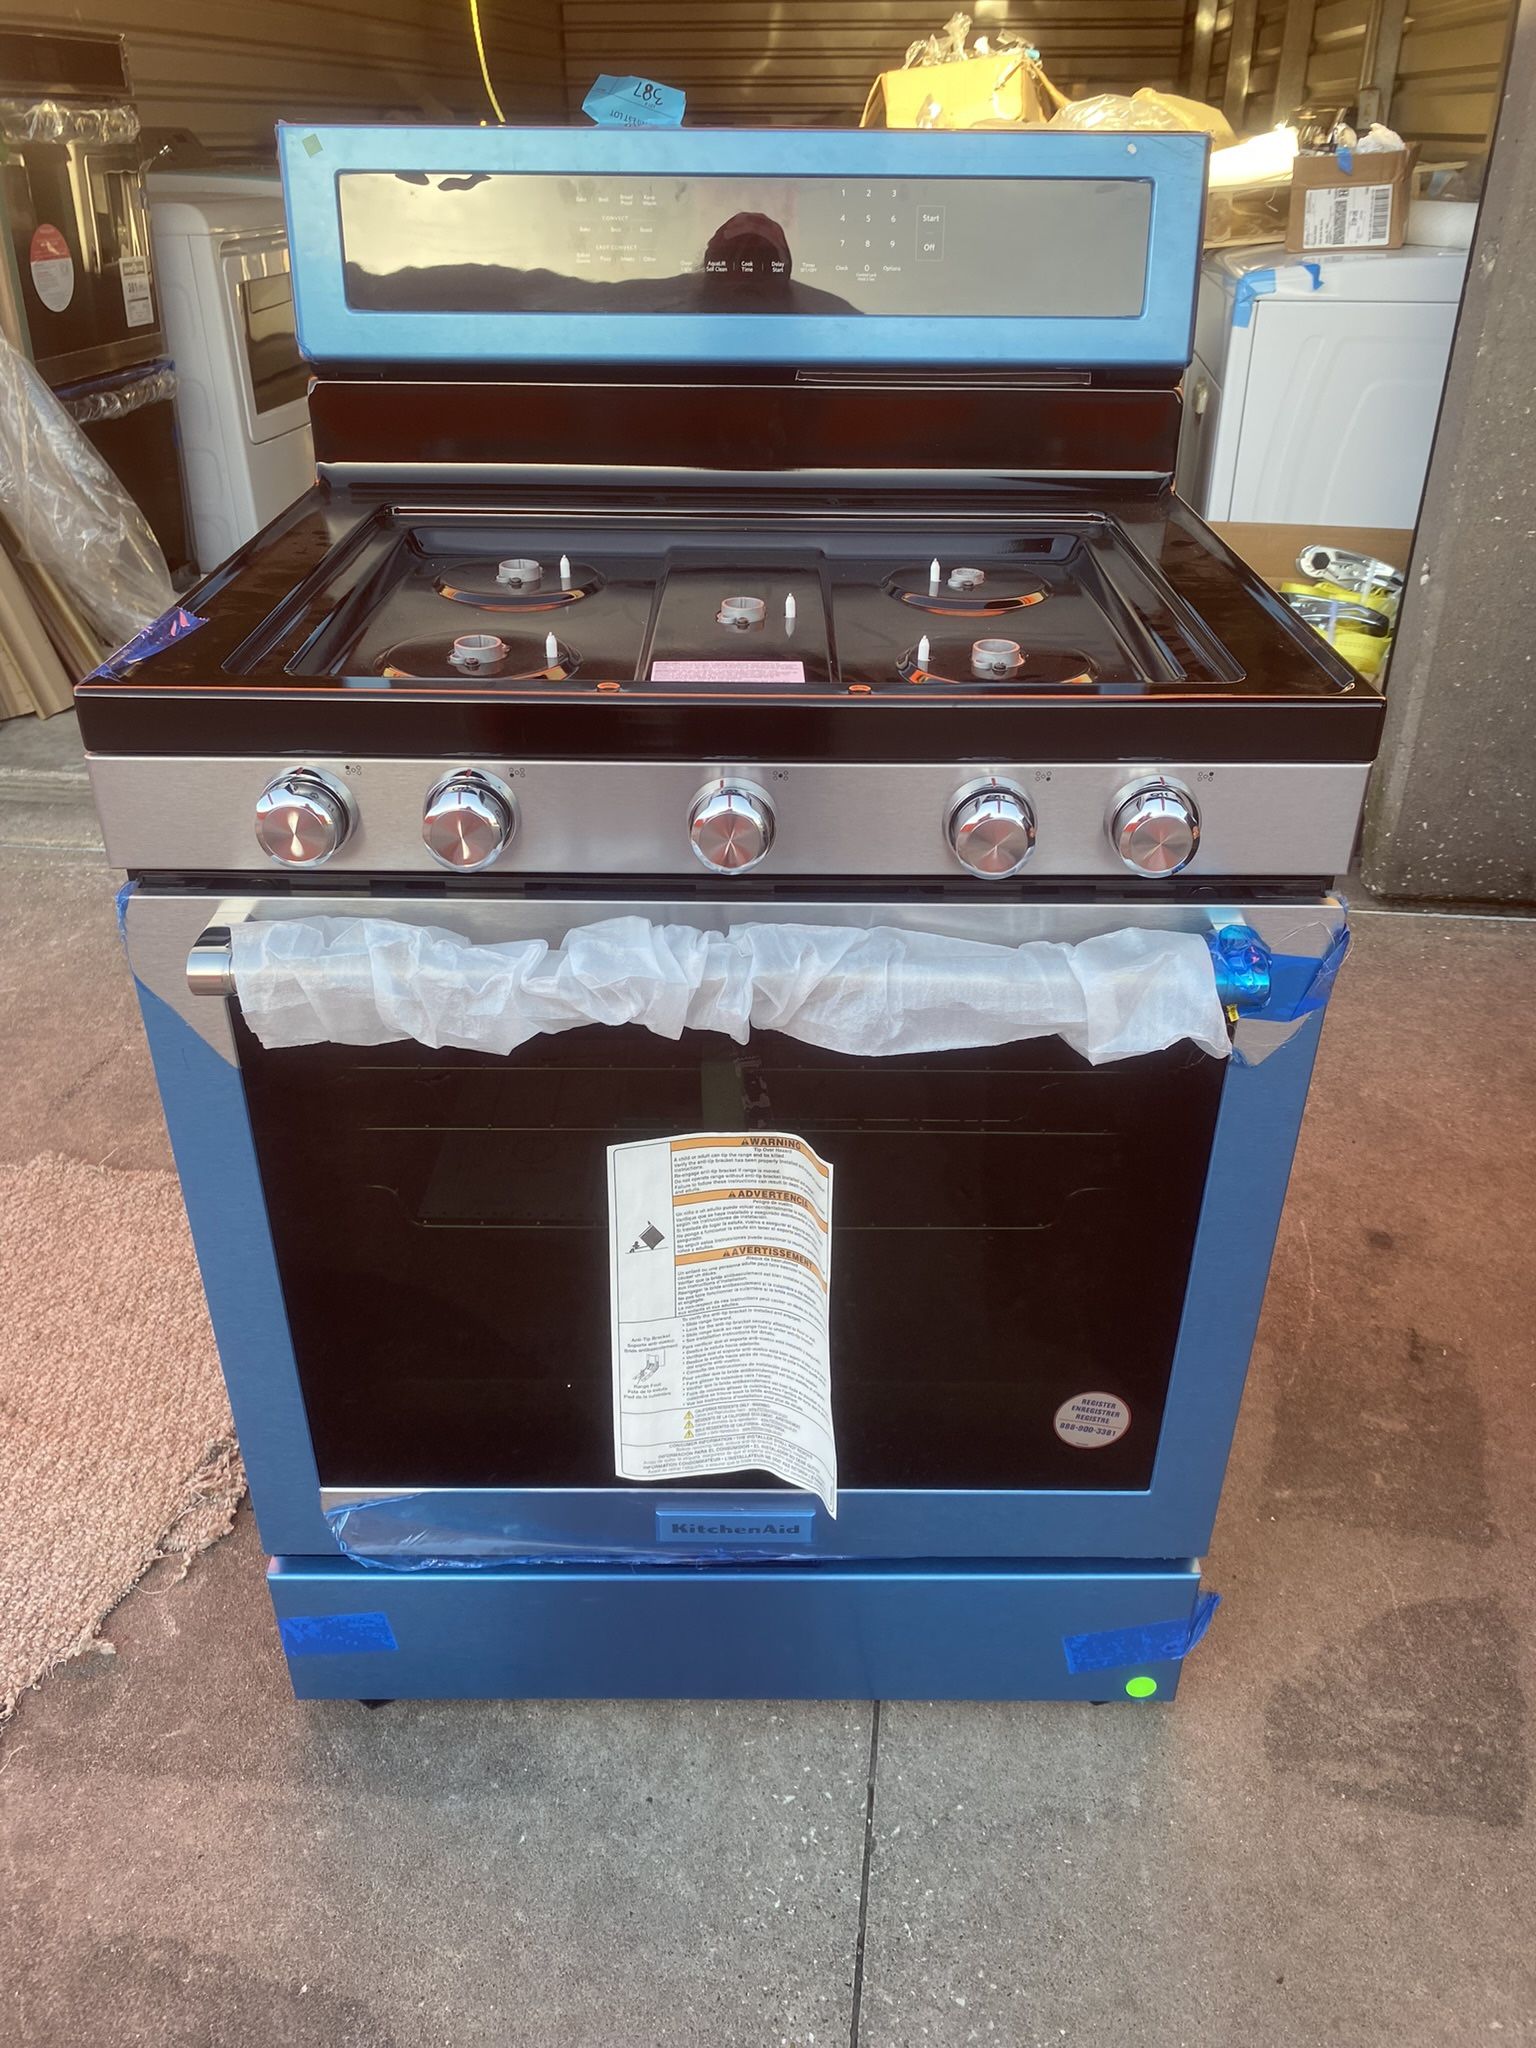 New.,has small Dent Bottom Right.. KitchenAid 5.8 cu. ft. Gas Range with Self-Cleaning Oven in Stainless Steel  $695.00     O’B’O’